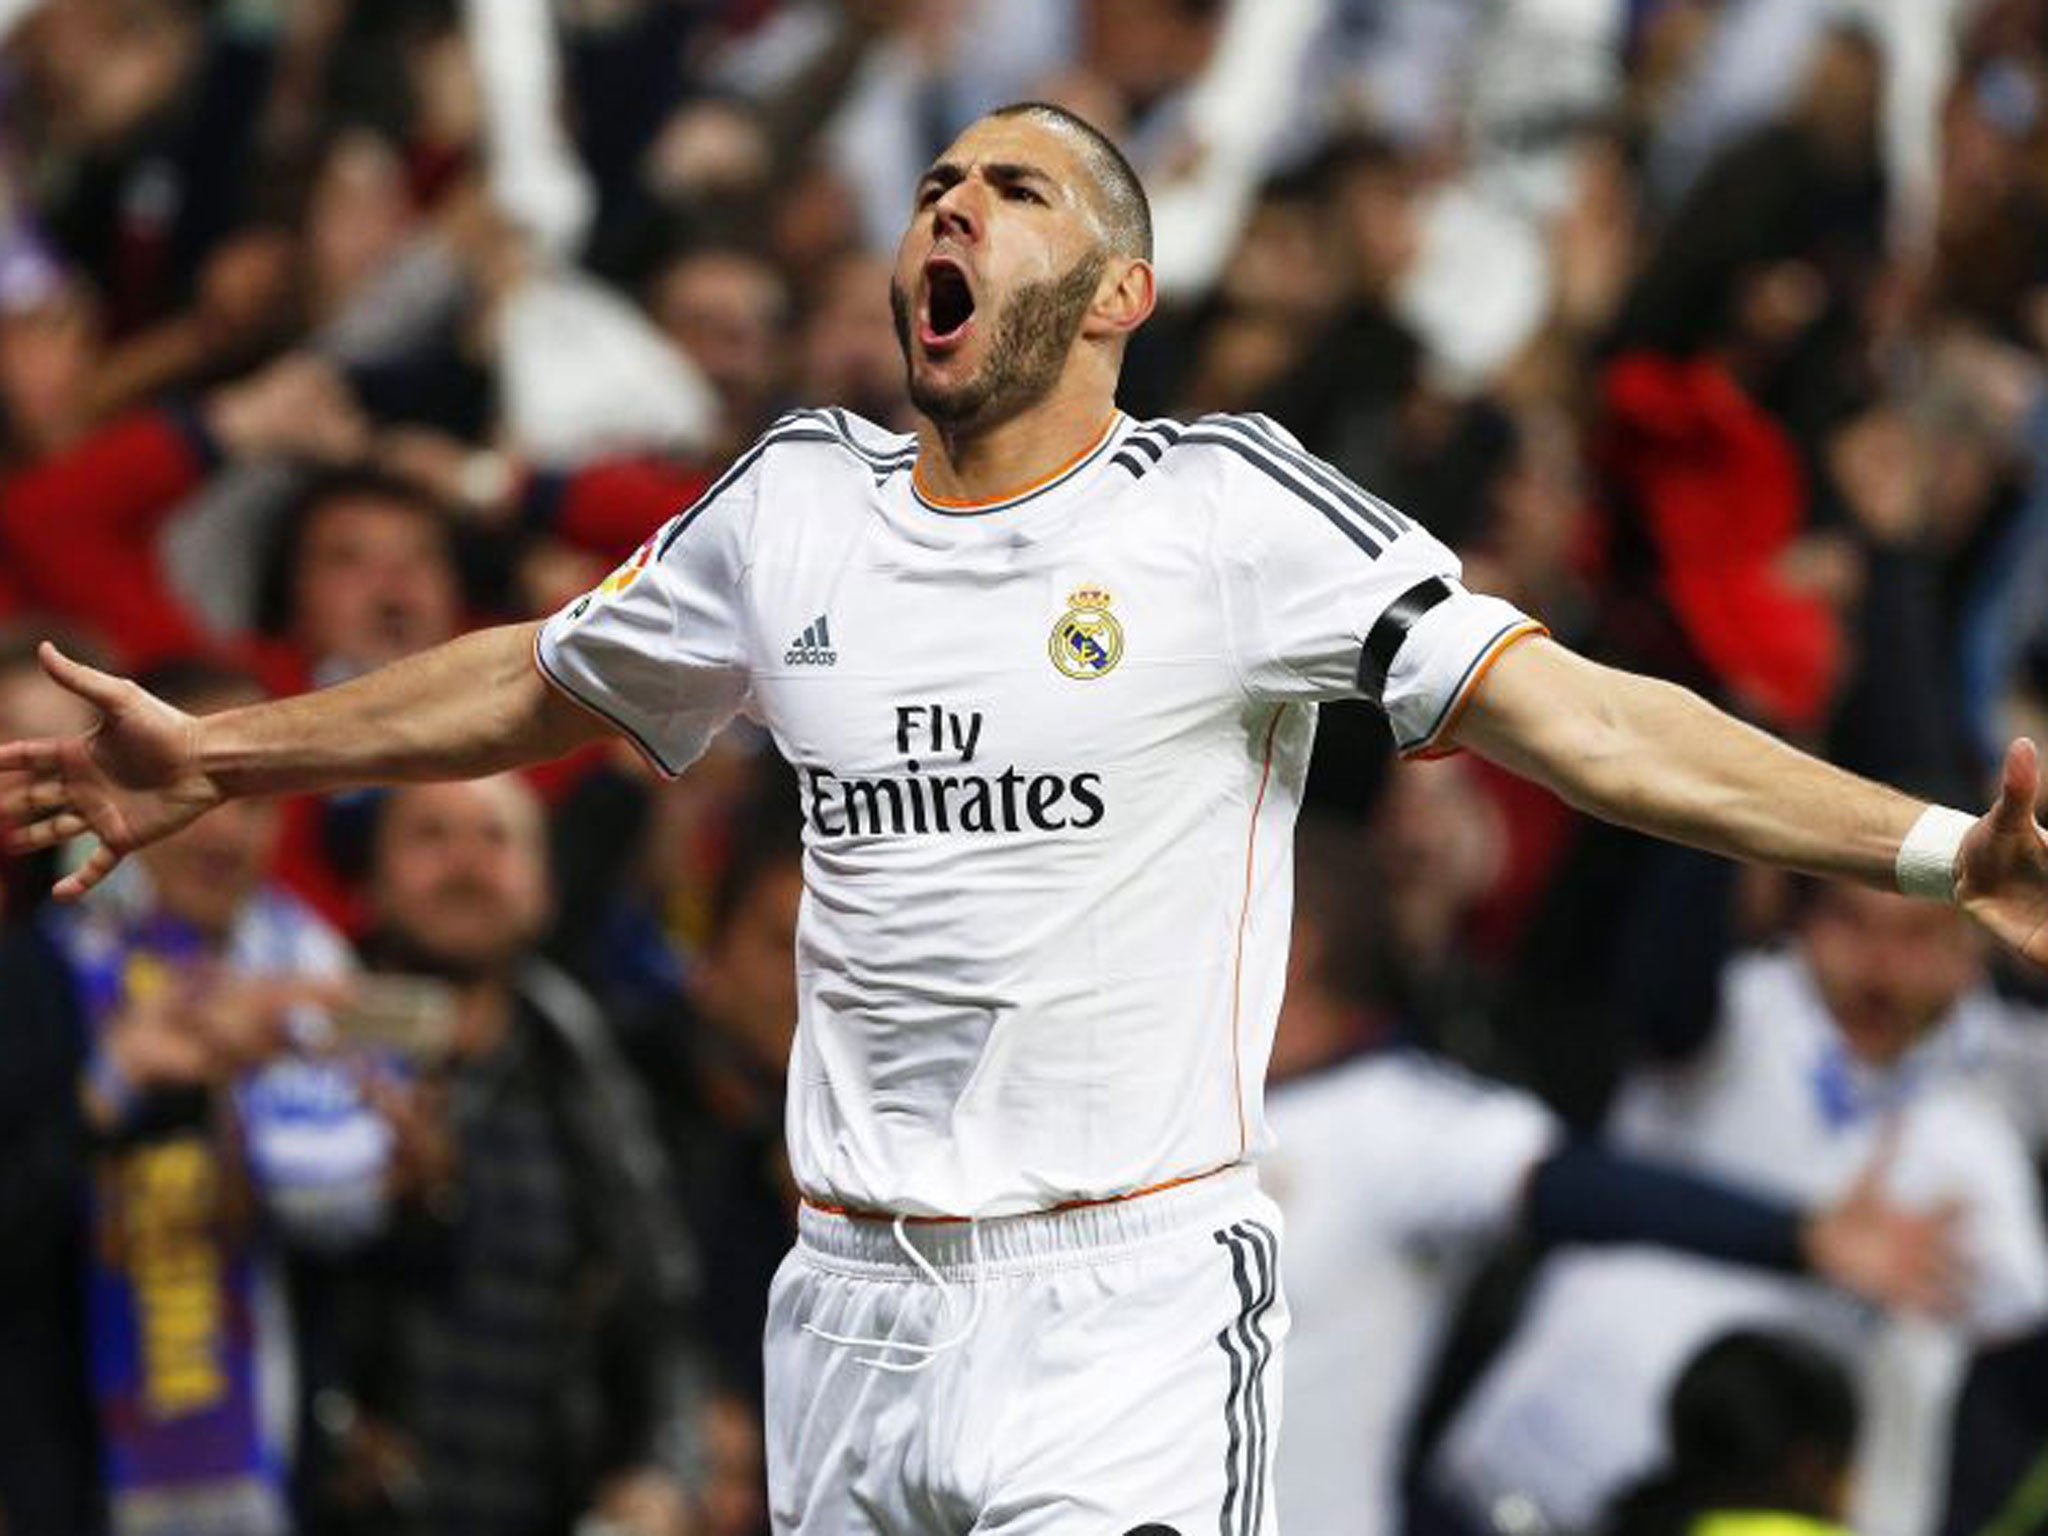 Karim Benzema is expected to be in action for Real Madrid against Bayern Munich